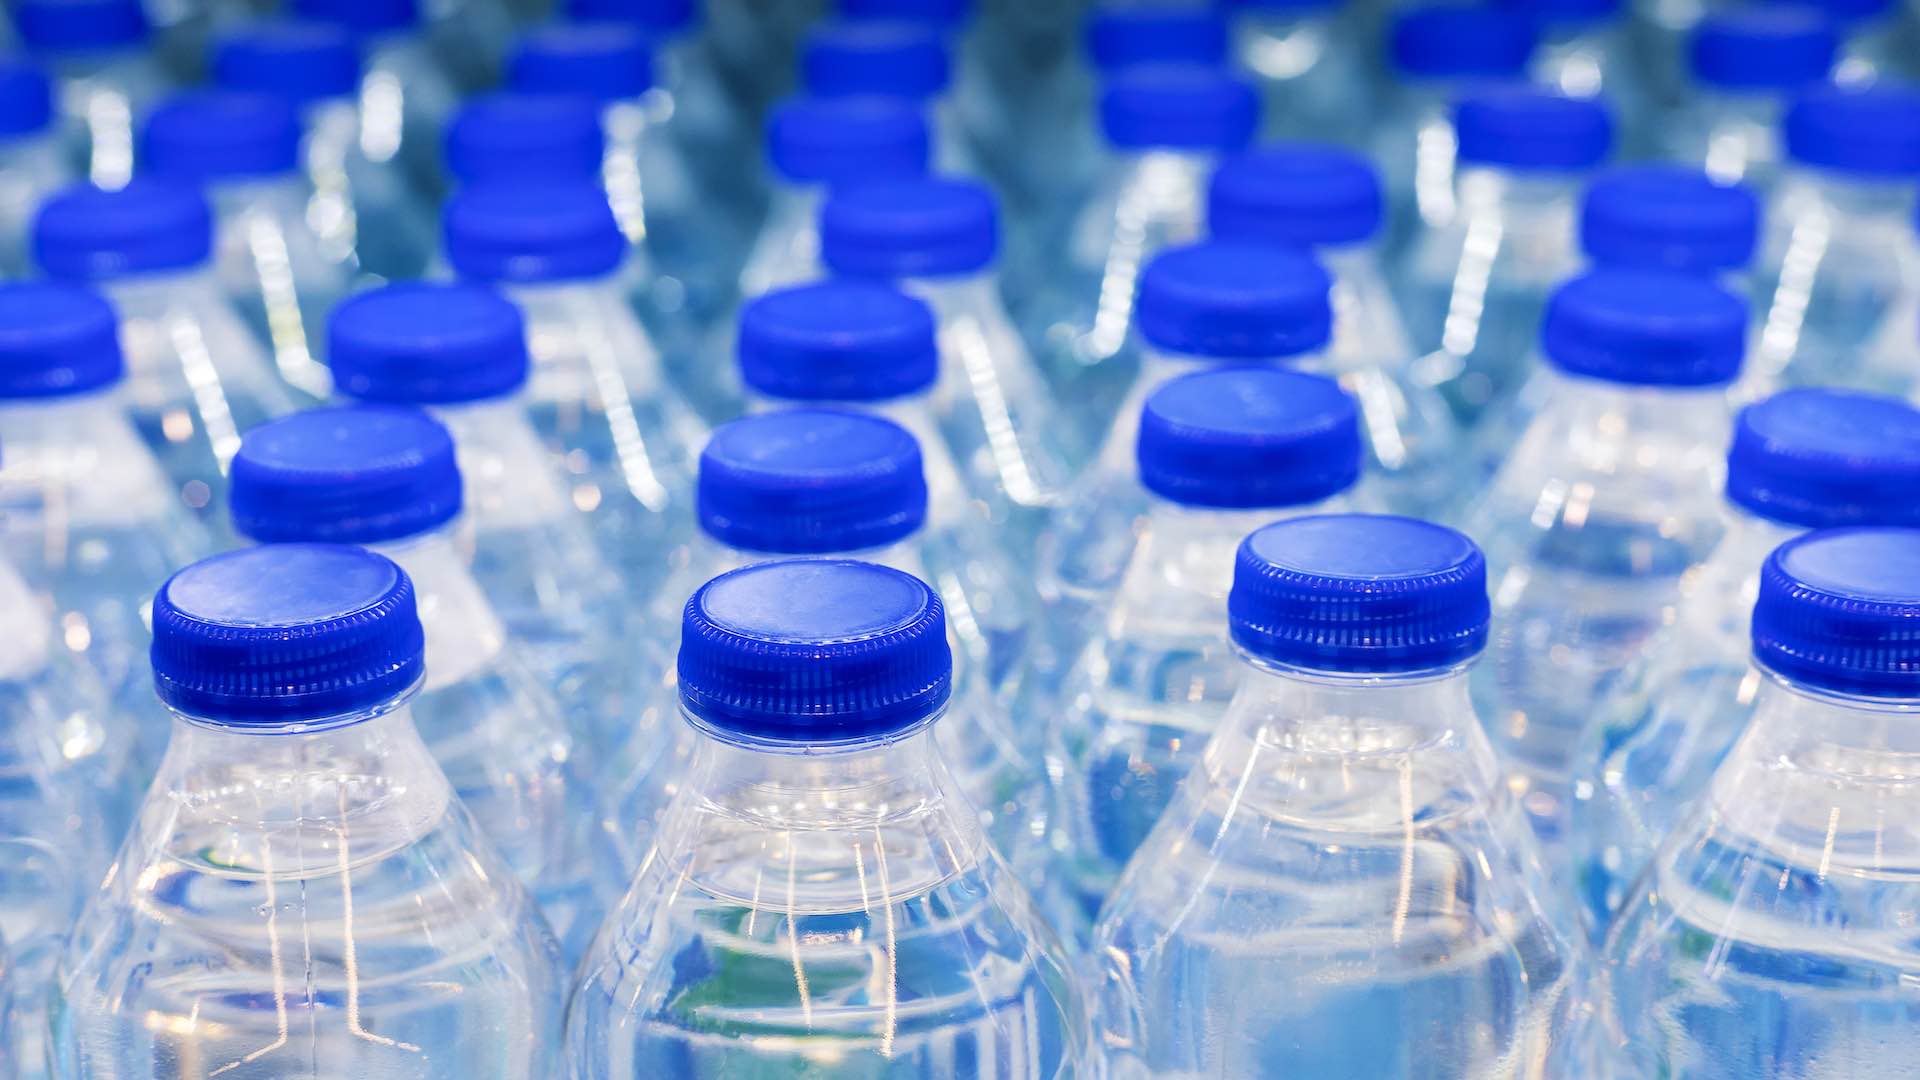 Bottled water safety under scrutiny after recent nanoplastic findings